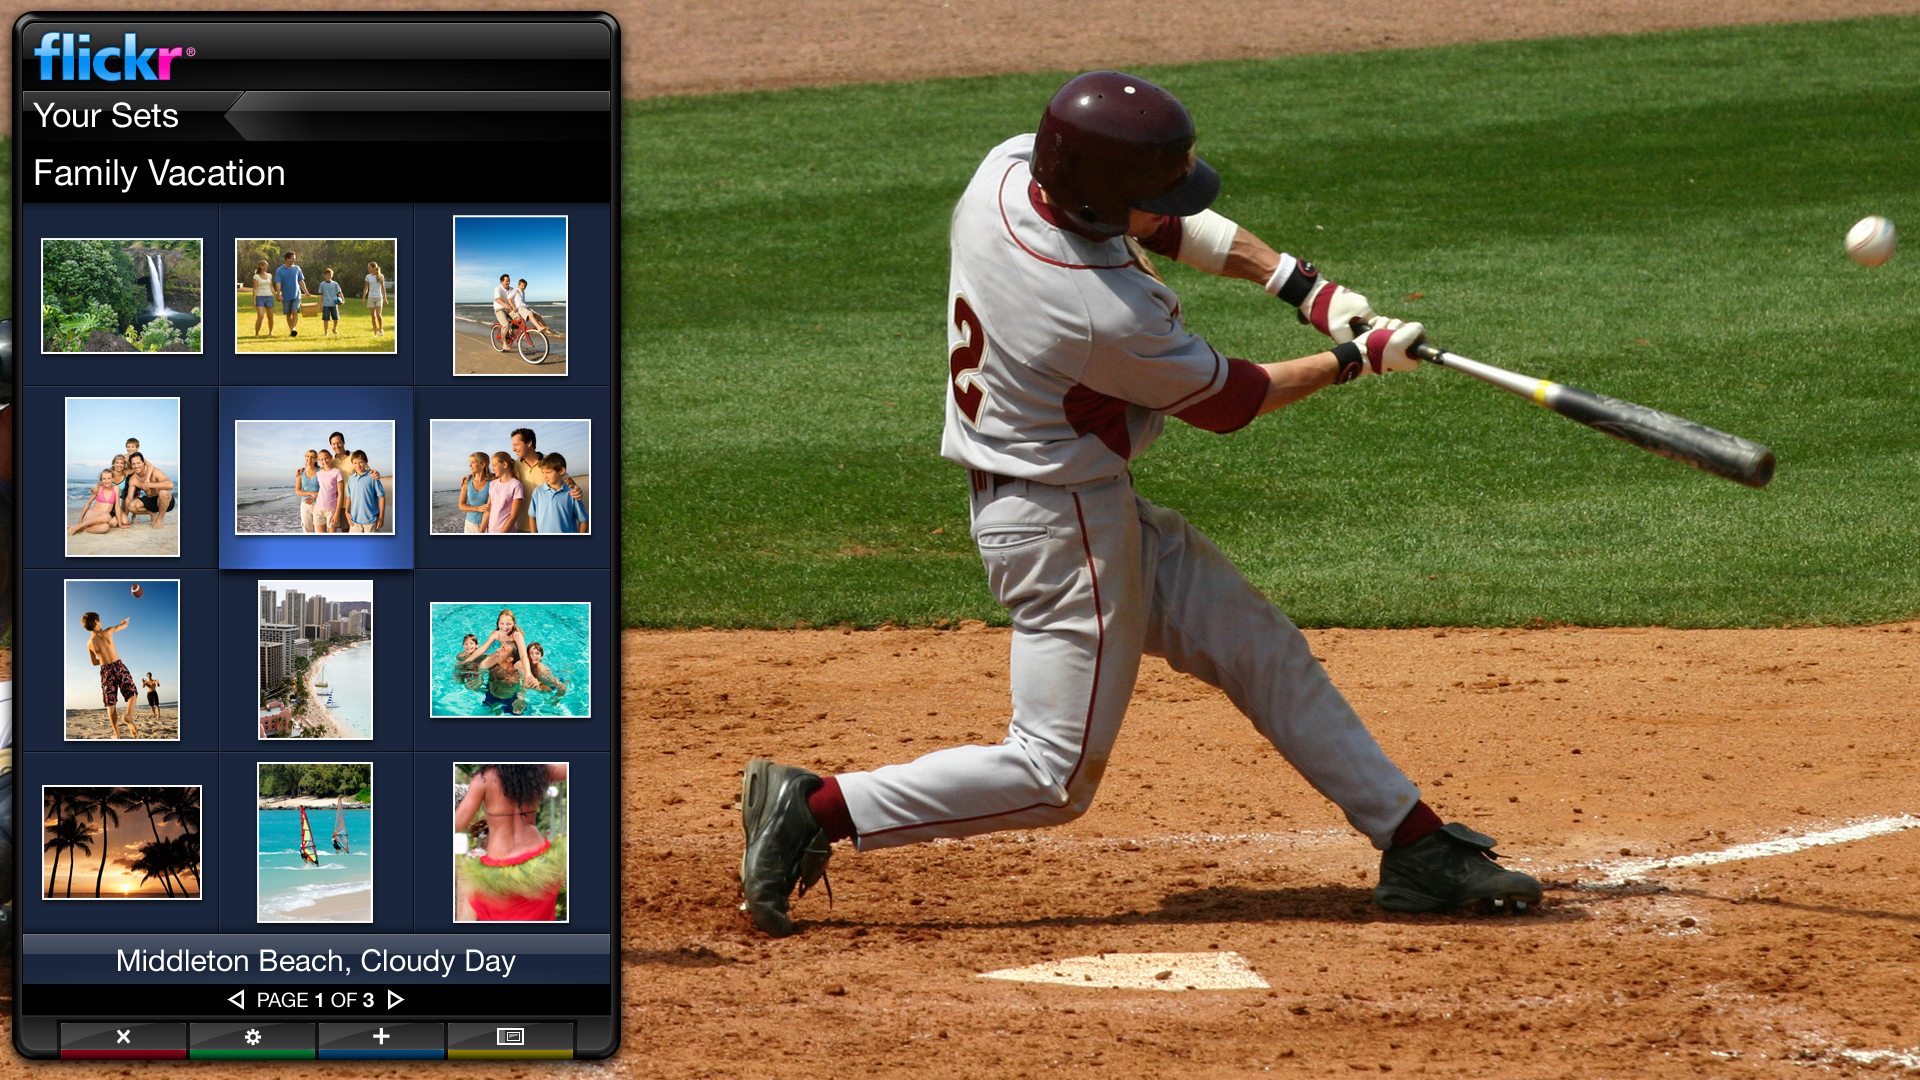 Yahoo's Widget Channel software lets TVs run network-enabled applications such as this one for Yahoo's Flickr photo-sharing service.